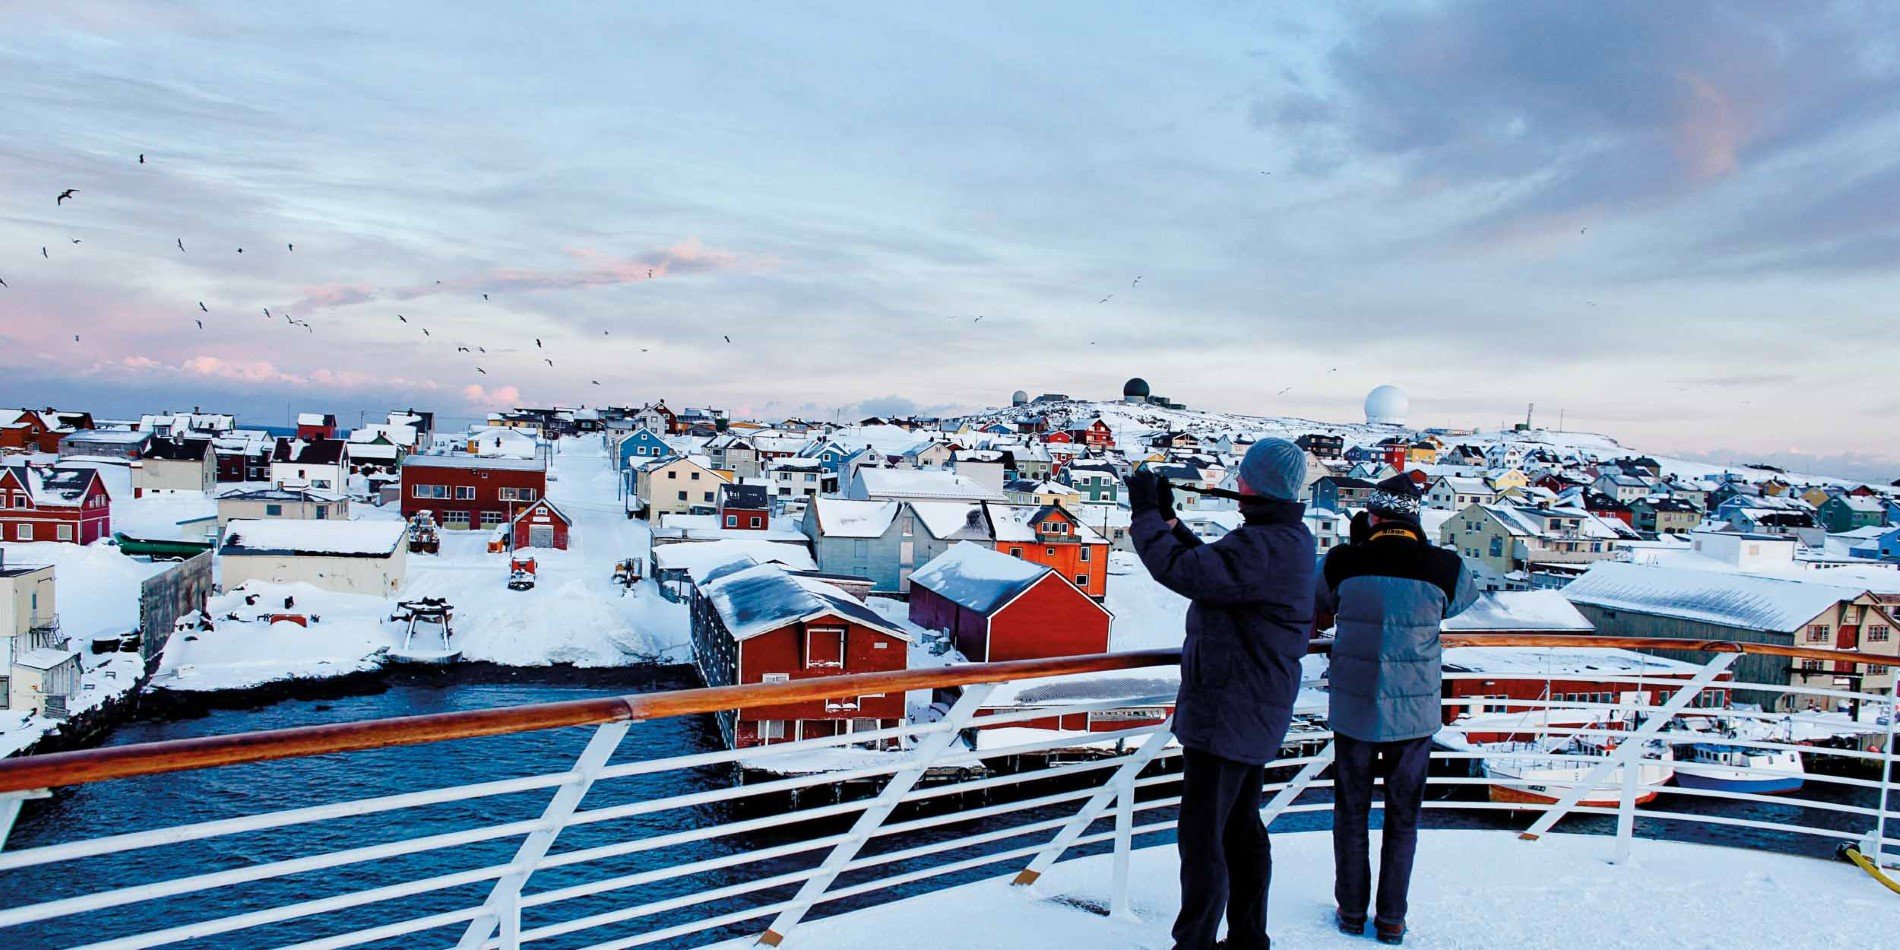 Vardø seen from out on deck, winter